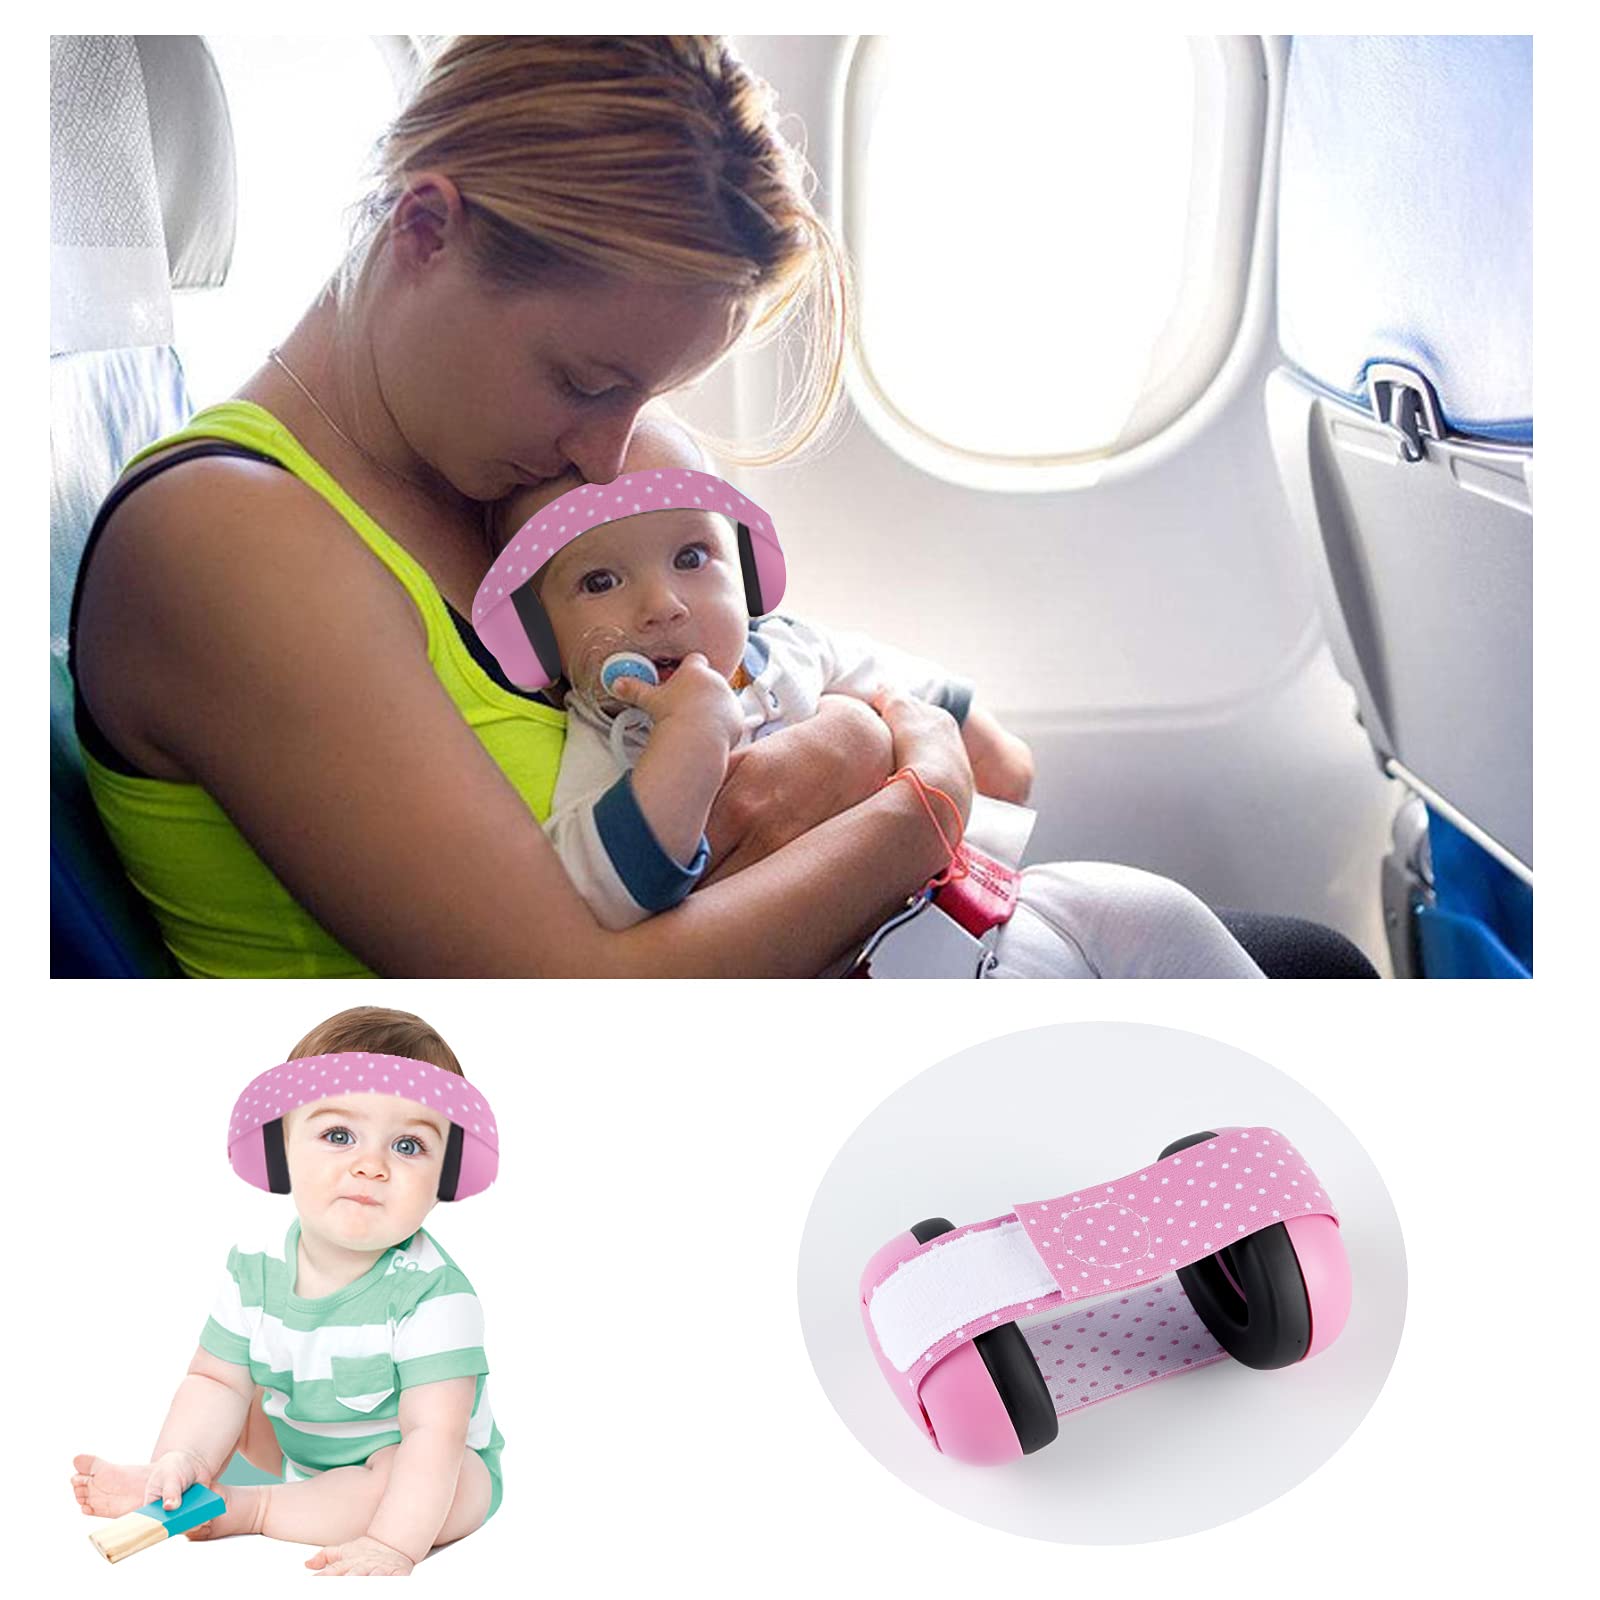 nobrand WORCBGIO Baby Hearing Protection Earmuffs Noise Eliminating Elastic Adjustable for Quiet Sleep and Preventing Potential Hearing Damage (Pink)